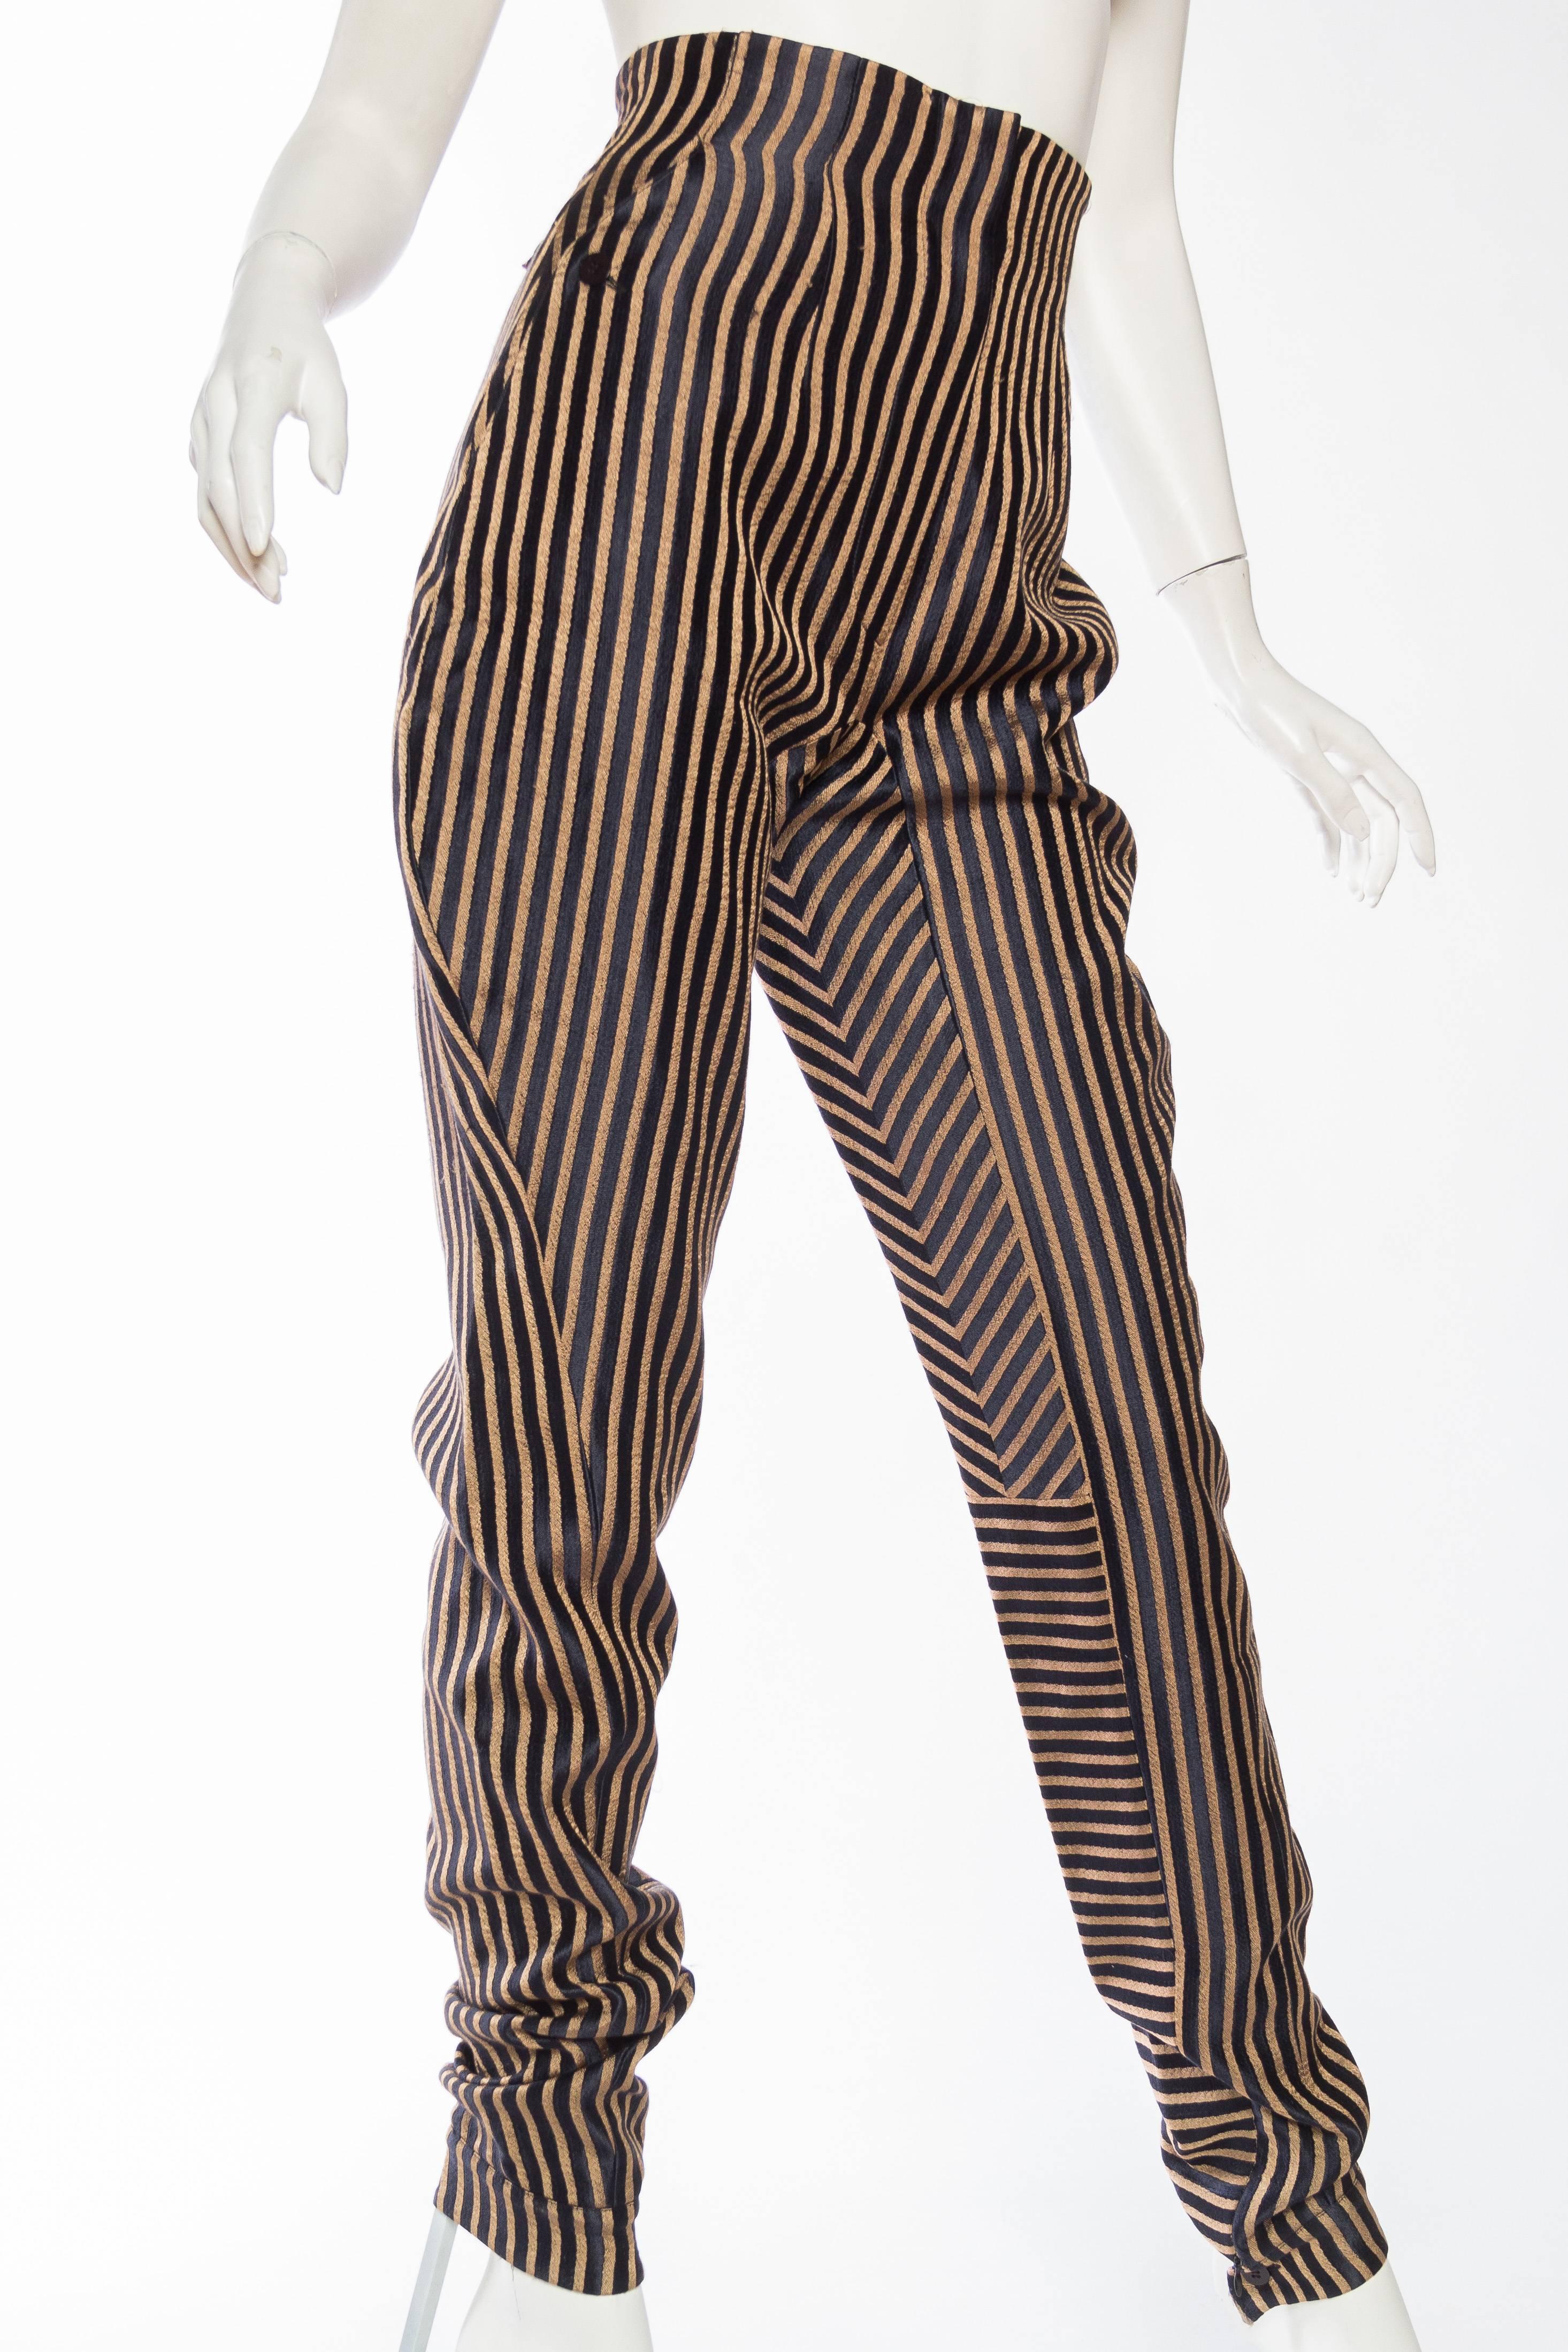 Black High-Waisted Gianfranco Ferre Silk Striped Trousers